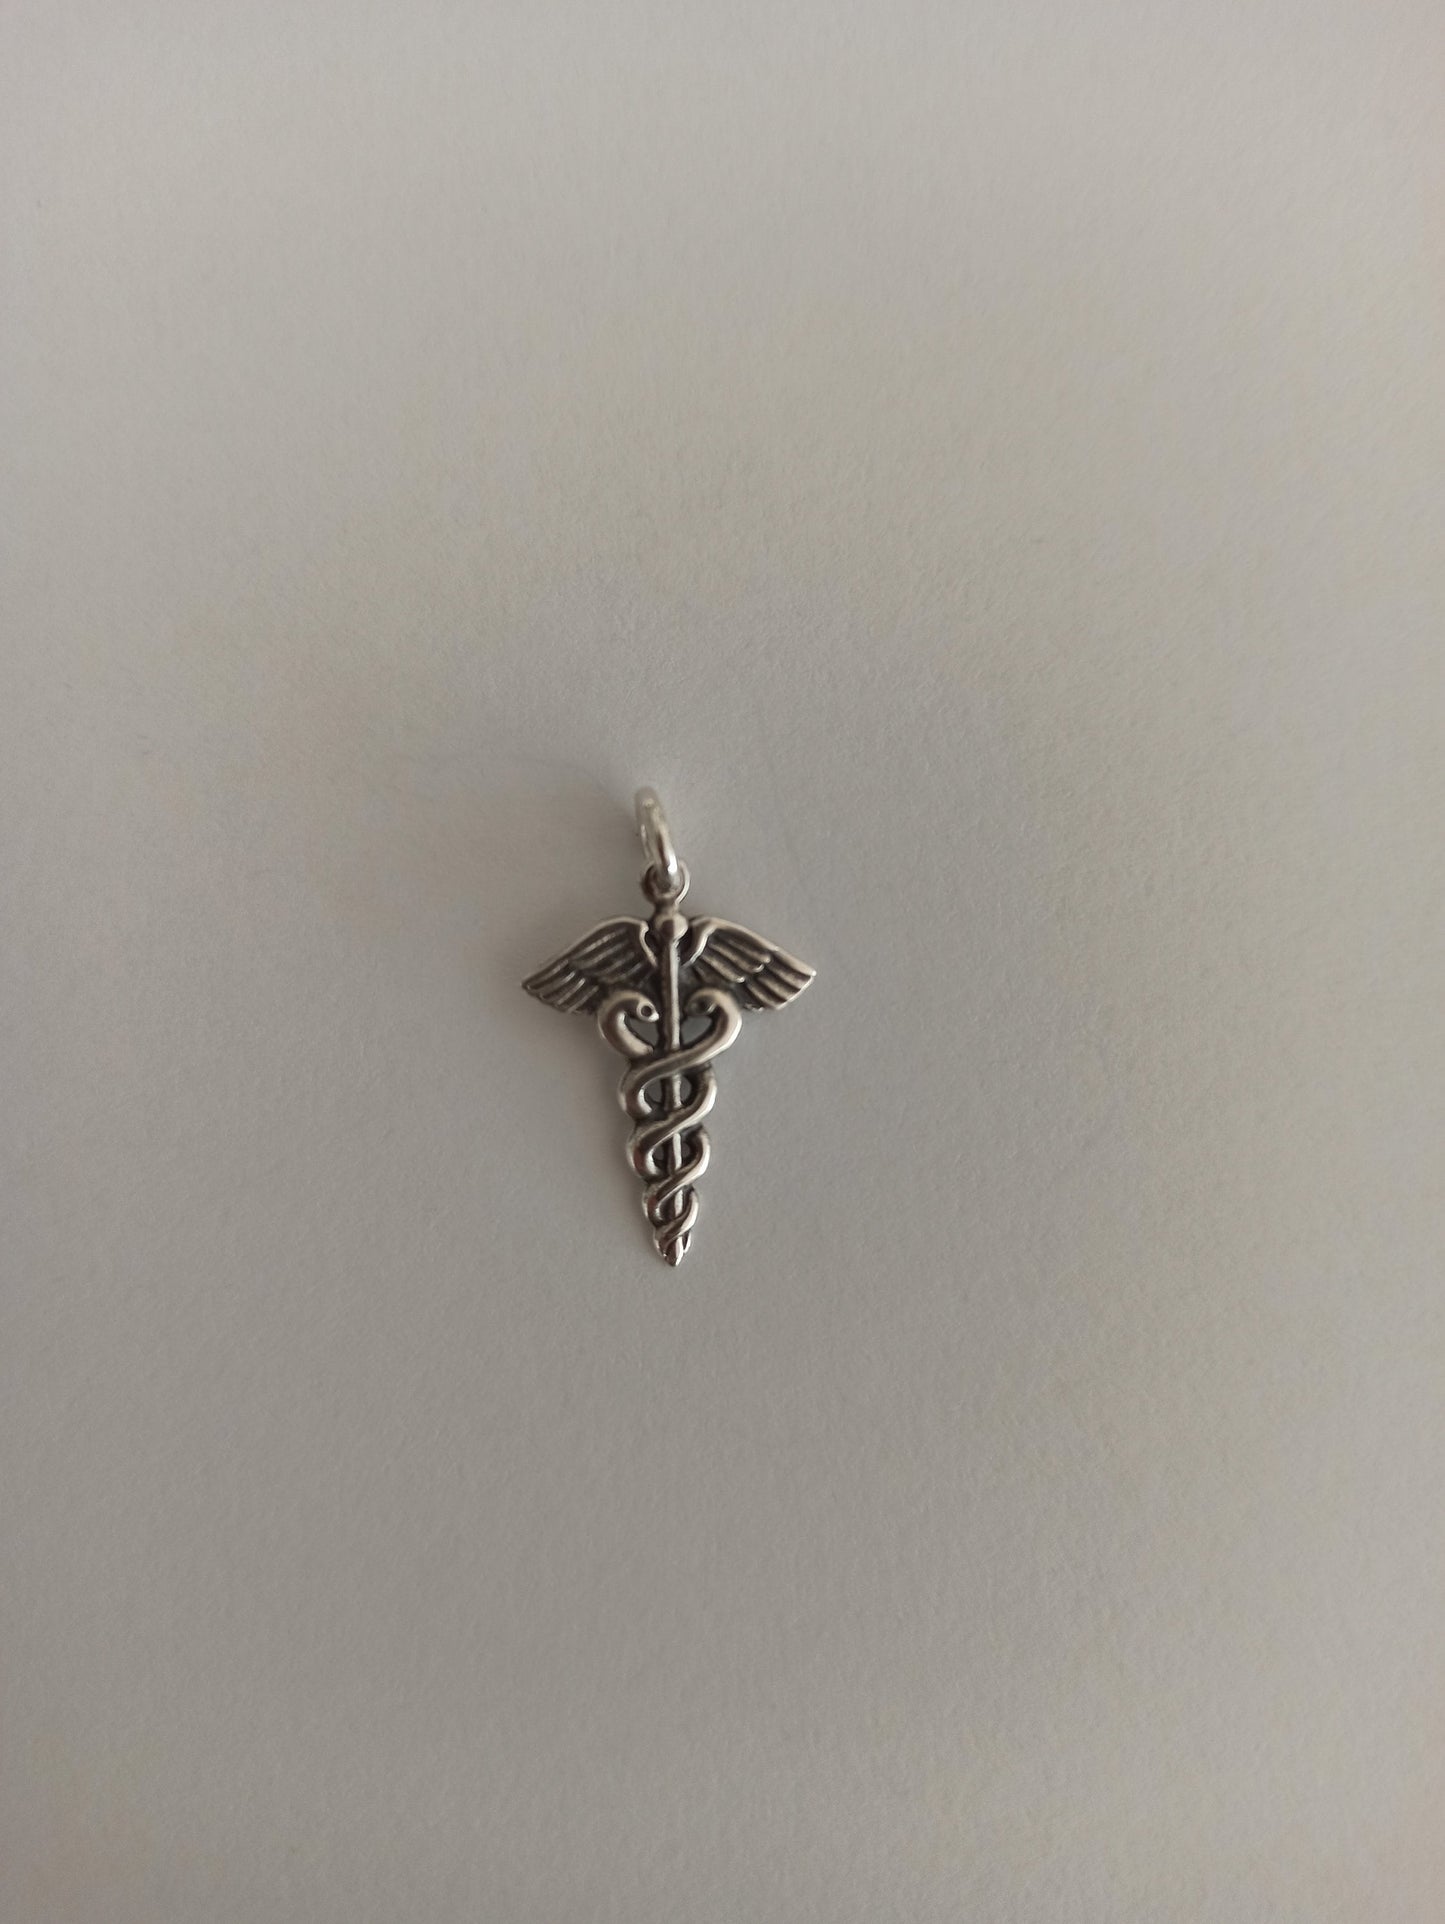 Caduceus - Symbol of God Hermes Mercury - Short Staff entwined by two Serpents, surmounted by Wings - Pendant - 925 Sterling Silver